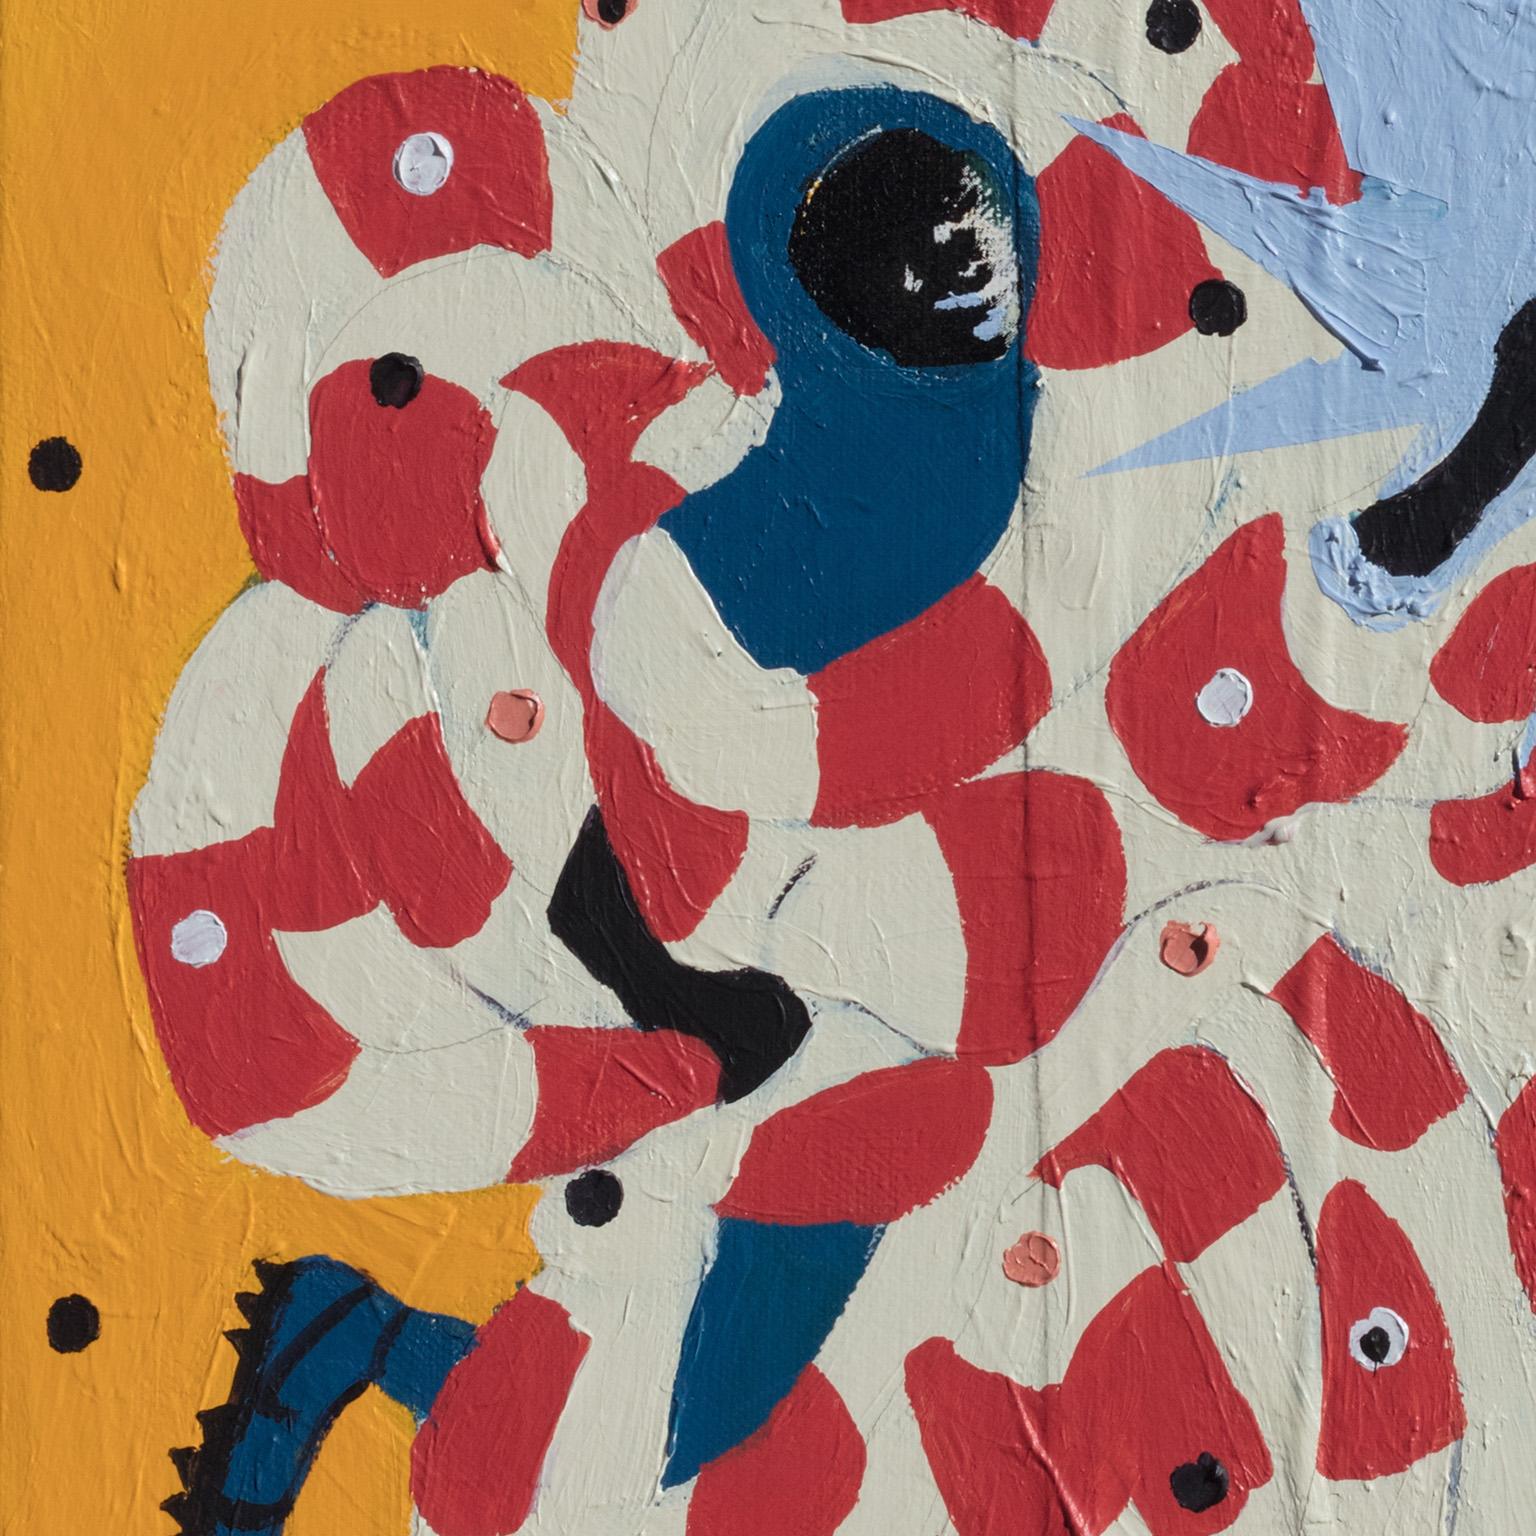 Mumbo Jumbo NYC#6 - Figurative Painting with Red, Orange, and Blue Colors 3